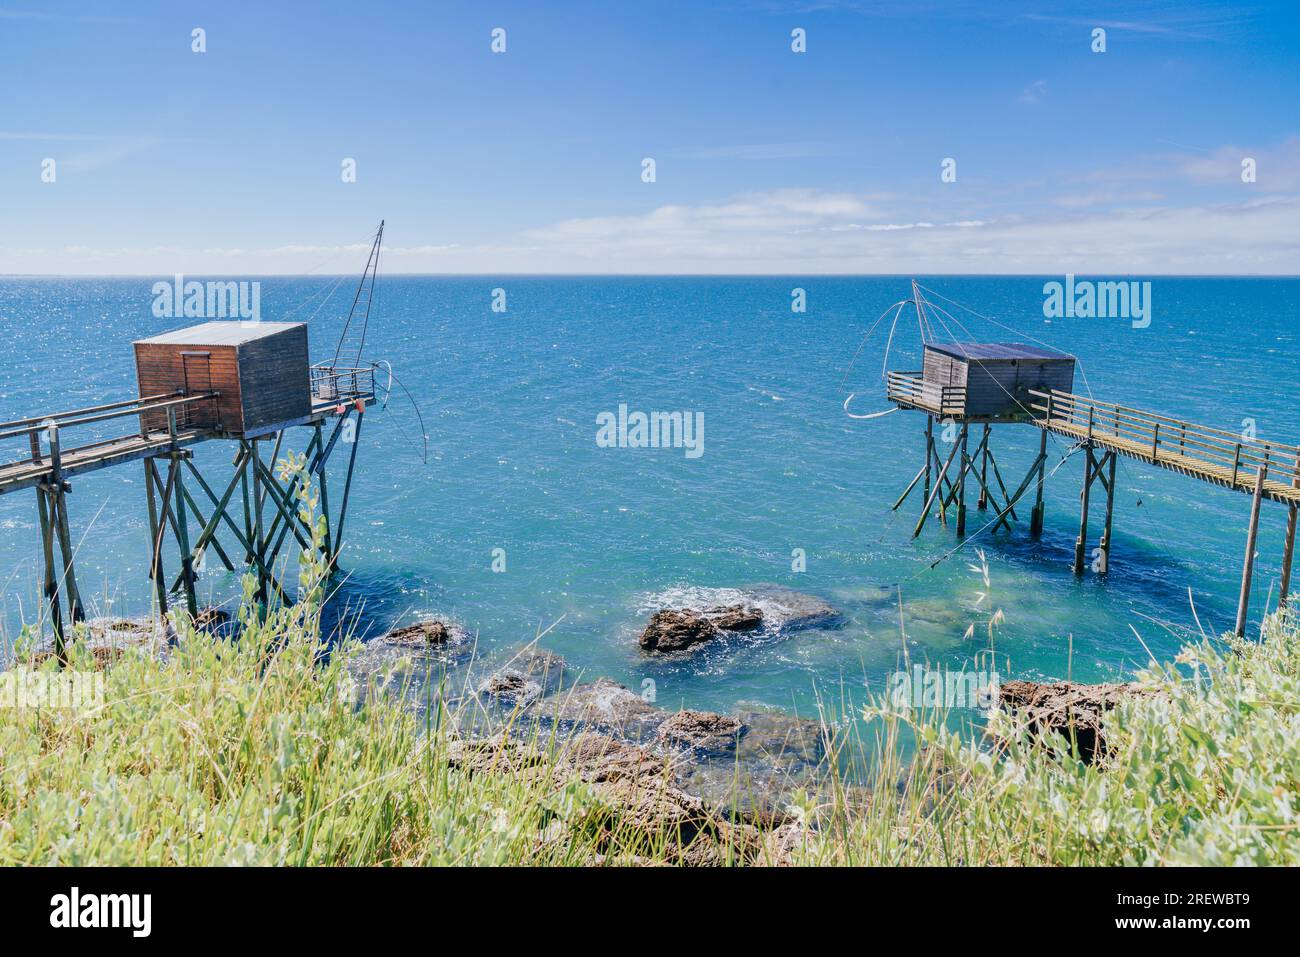 Traditional fishery huts made of wood by the Jade Coast in Pornic, France Stock Photo